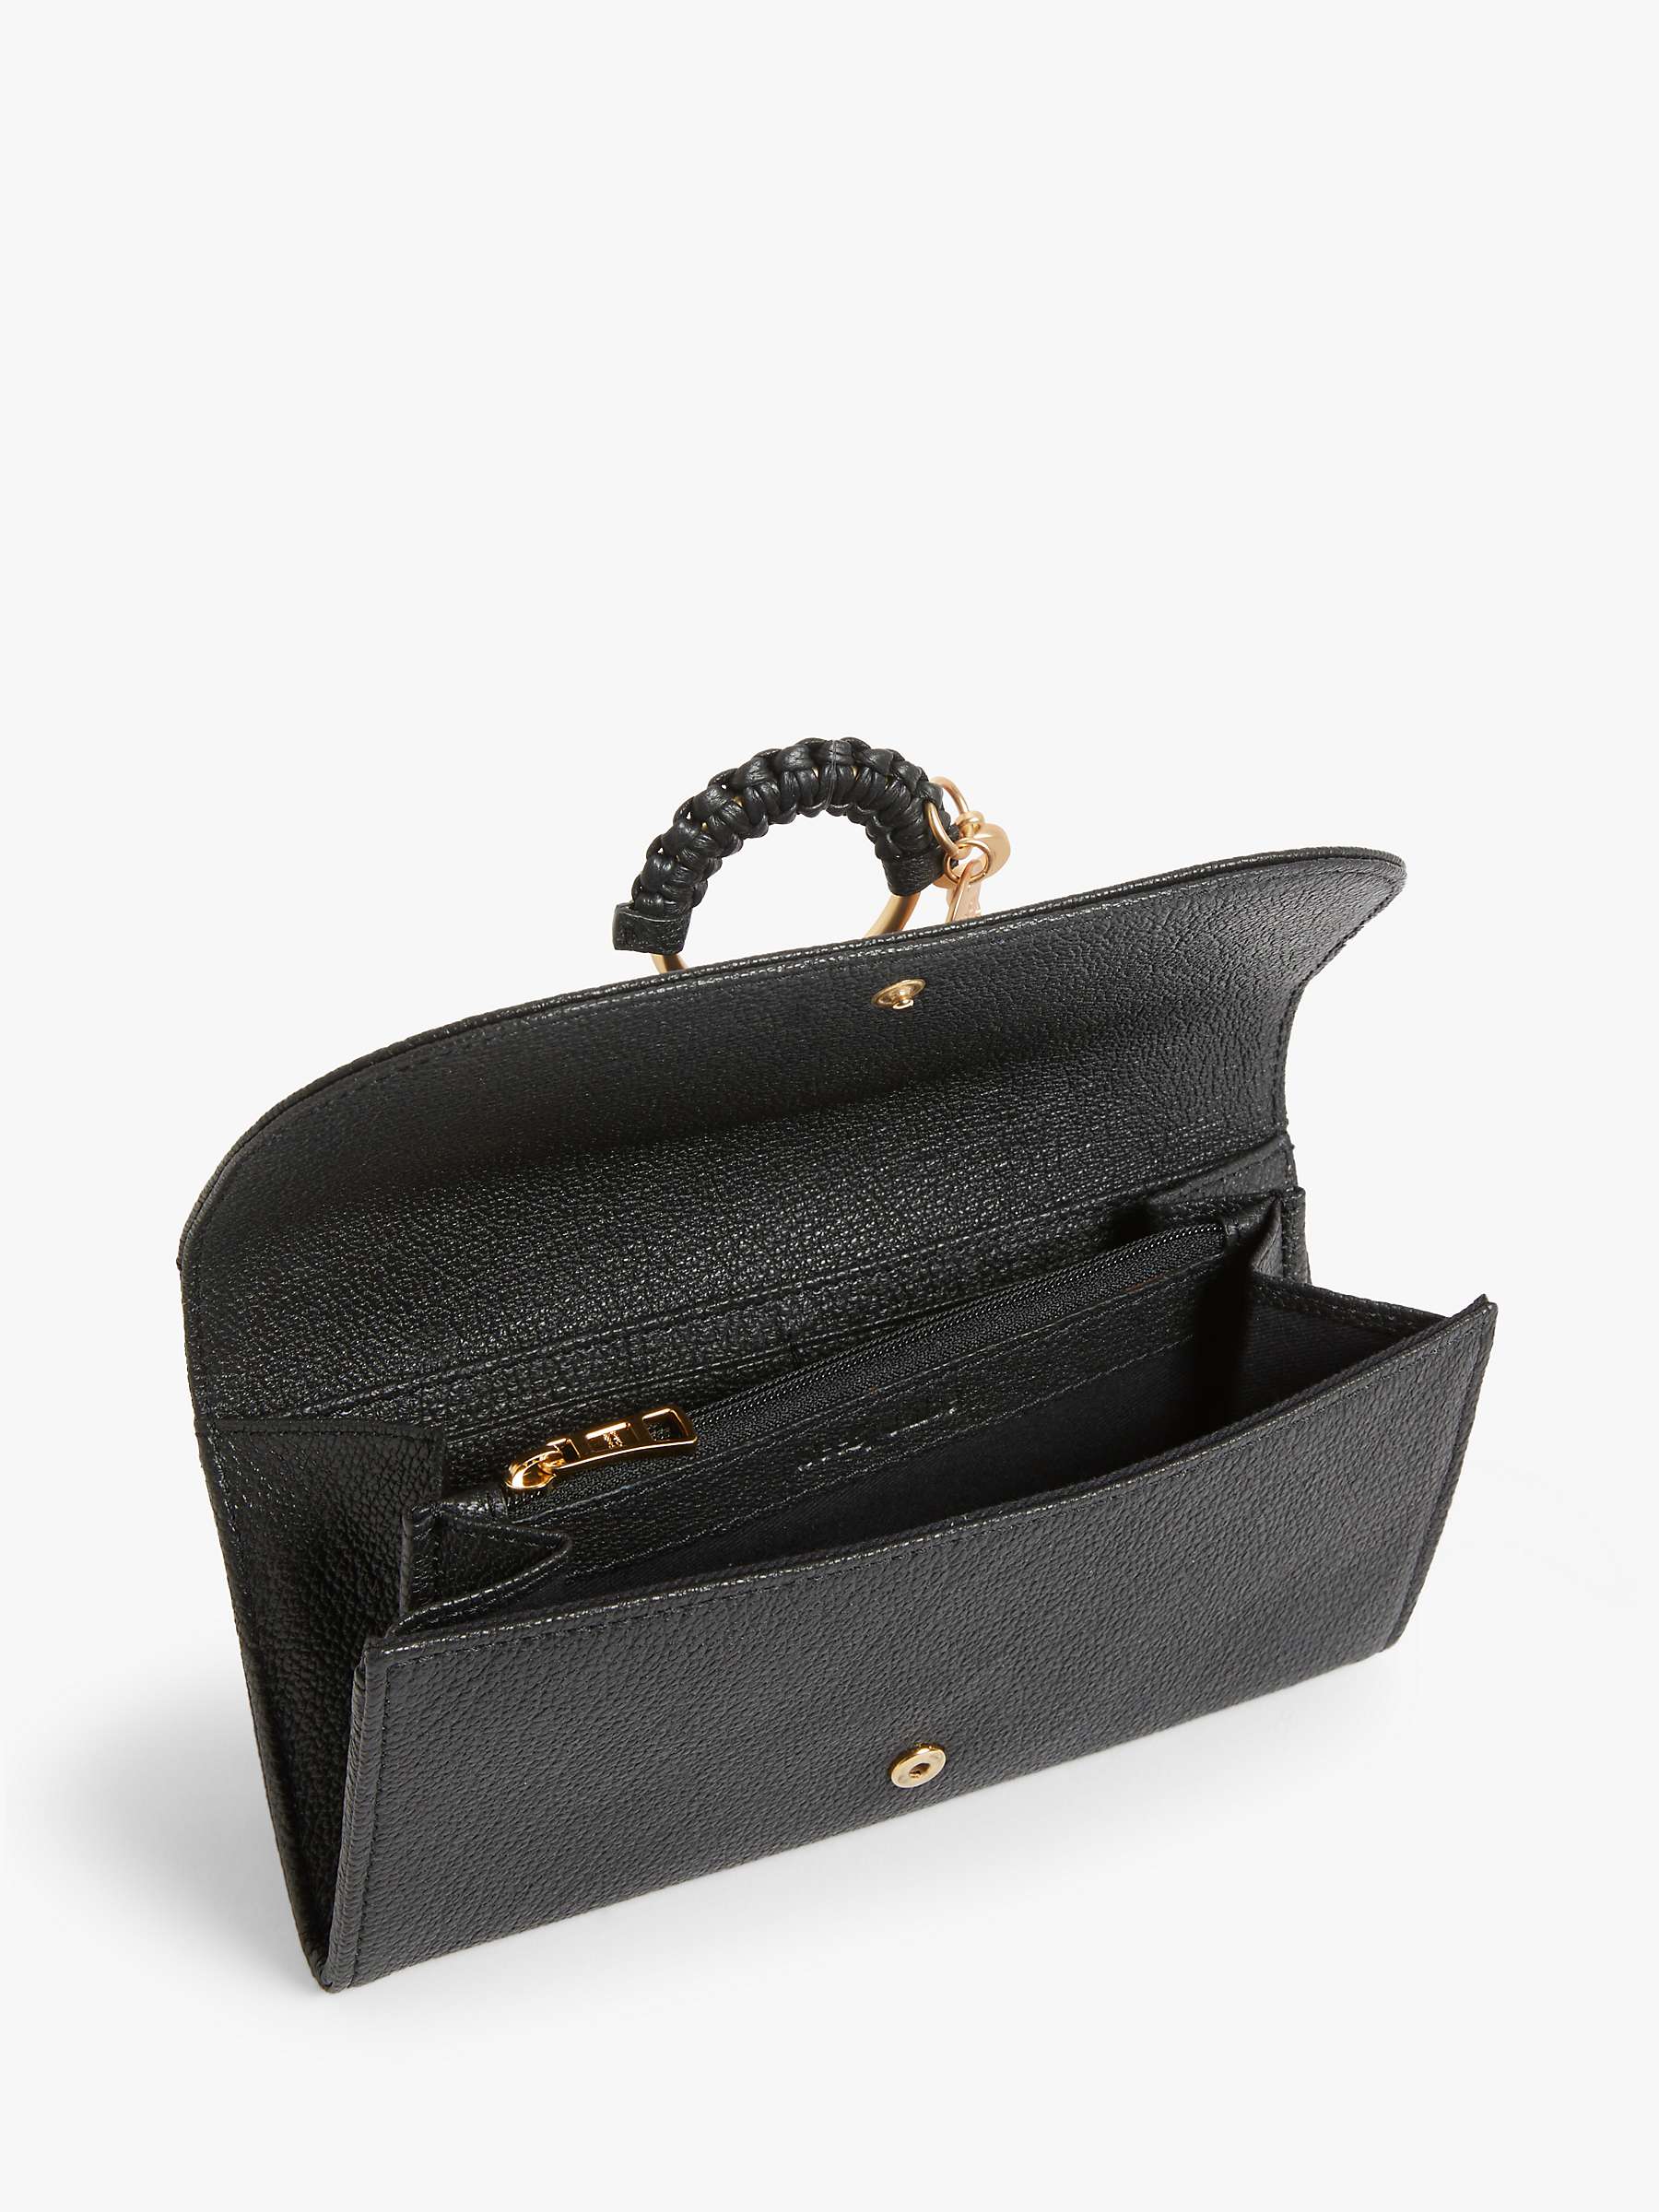 Buy See By Chloé Hana Large Leather Purse Online at johnlewis.com